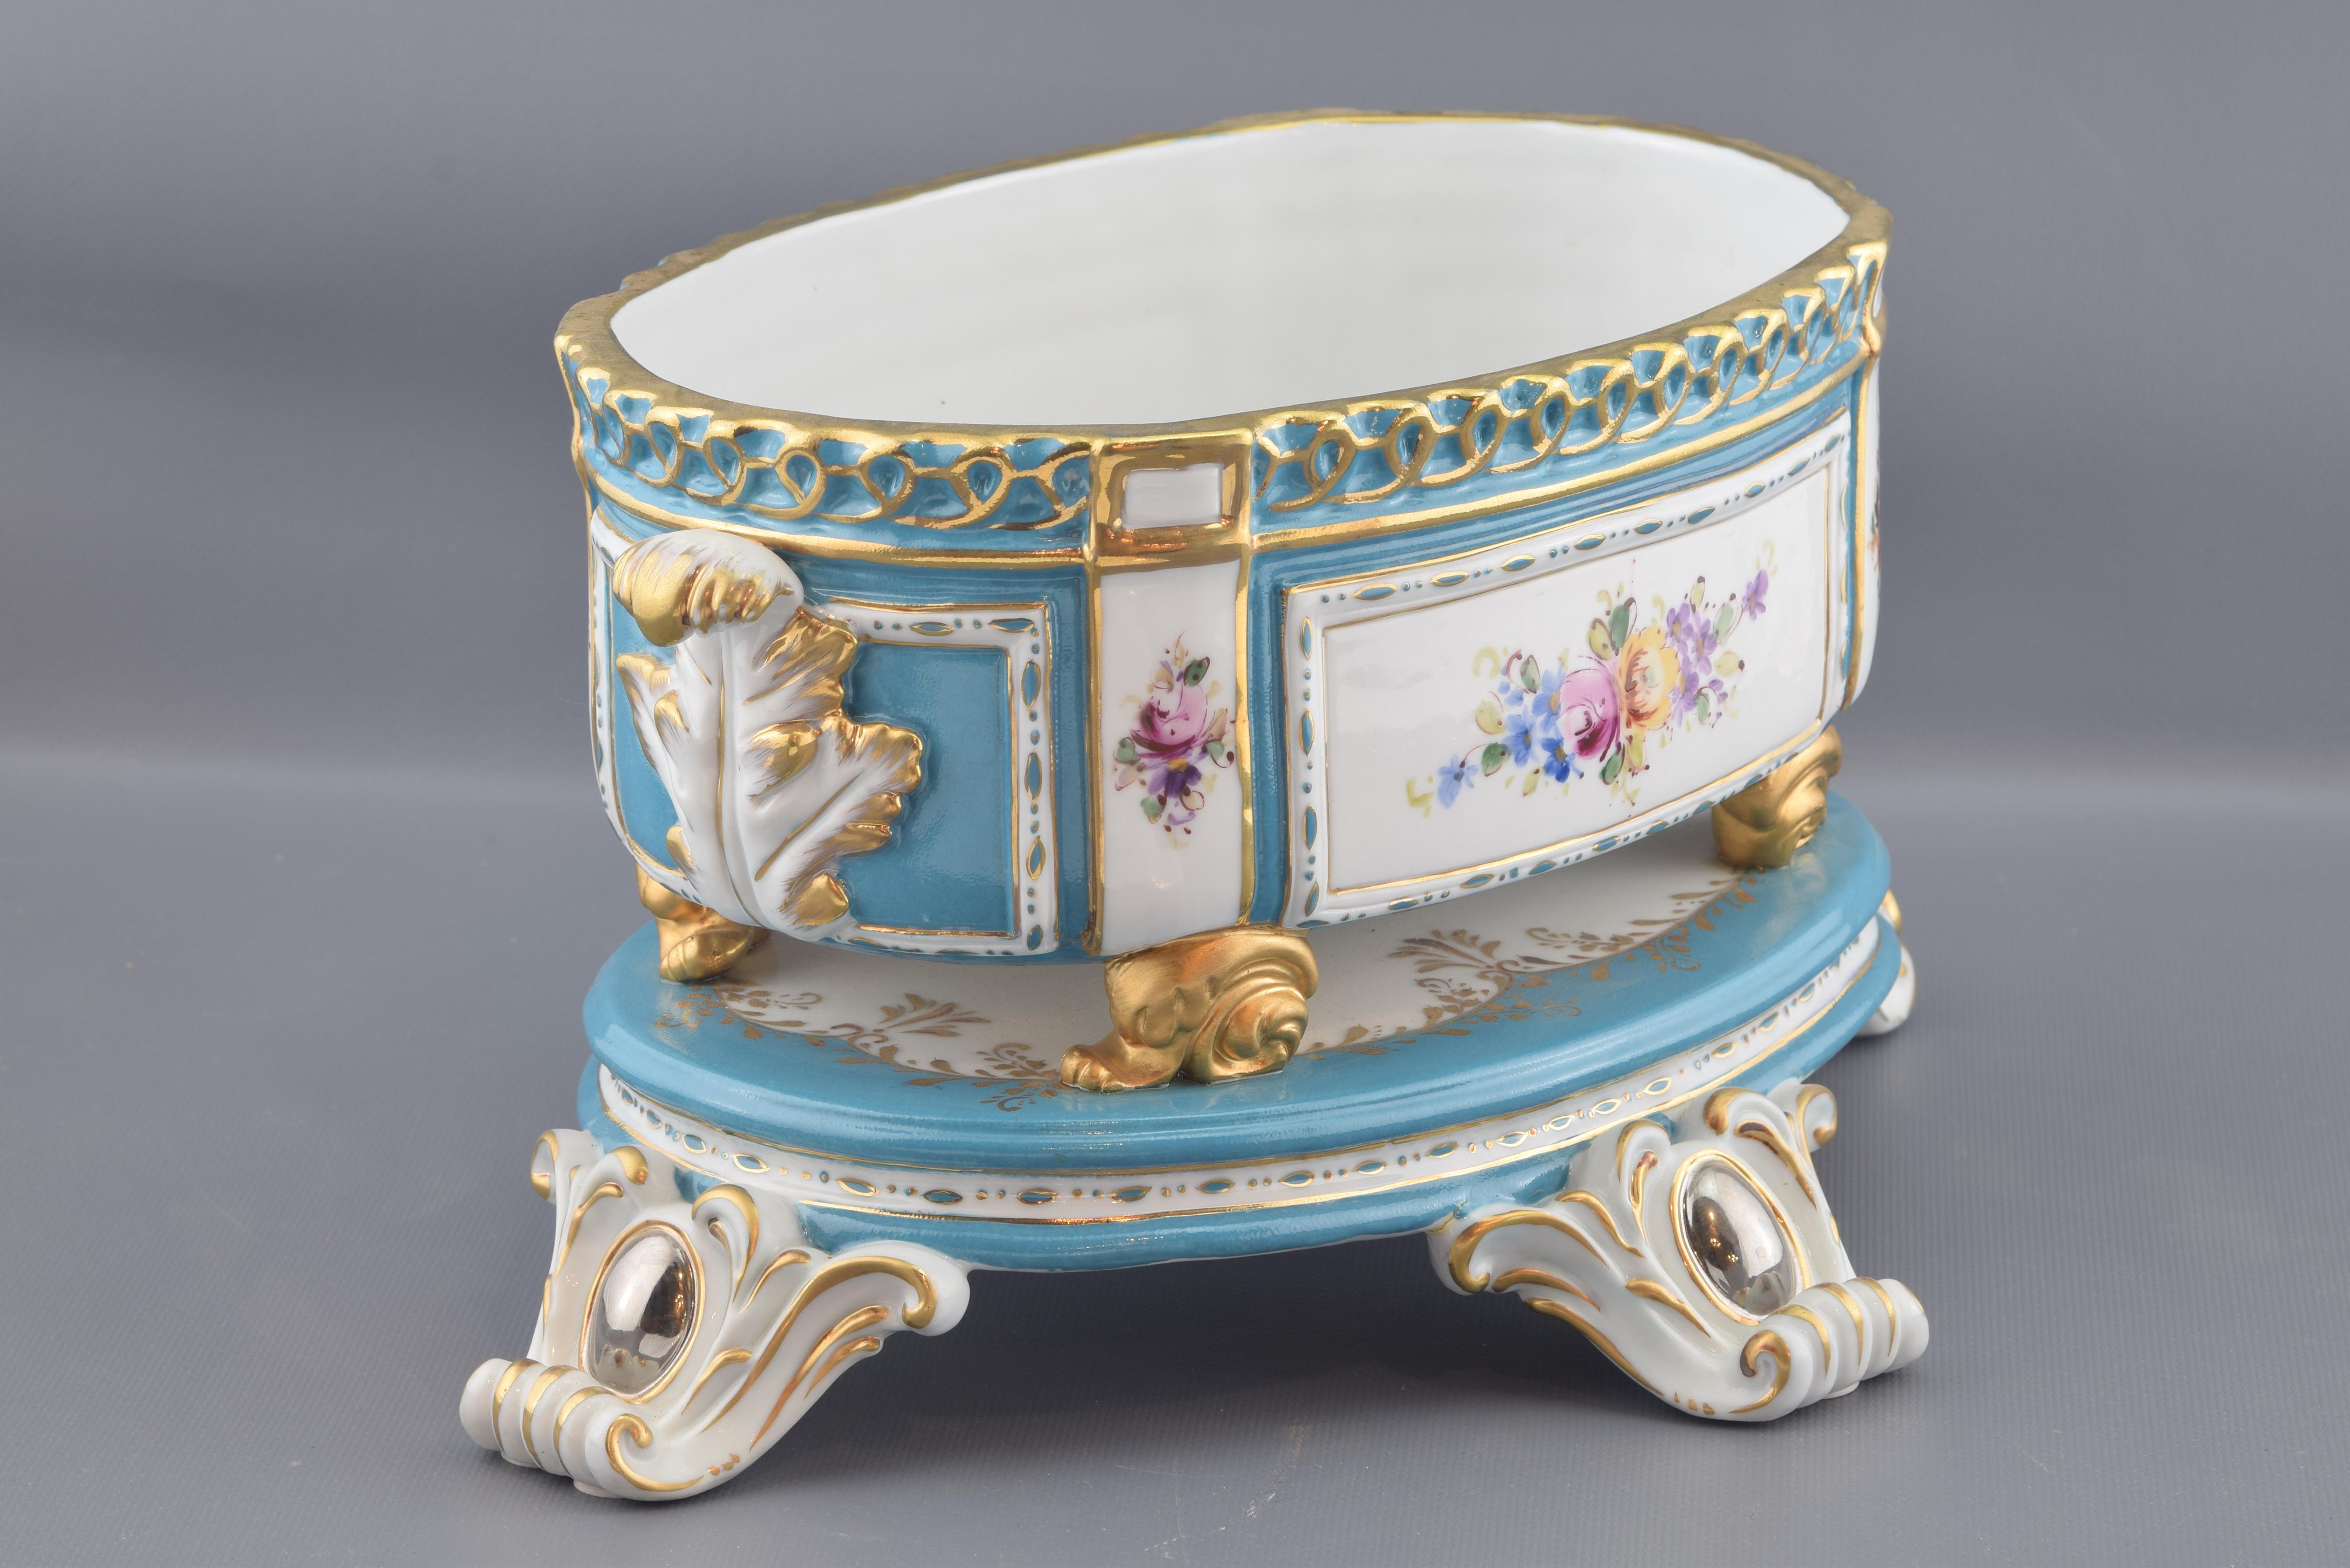 The oval base rests on four legs made with volutes, plant elements and oval mirrors. Above it, an oval box with two small handles is placed, decorated with rectangles with flowers, vegetal elements and an upper band in relief highlighted with golden